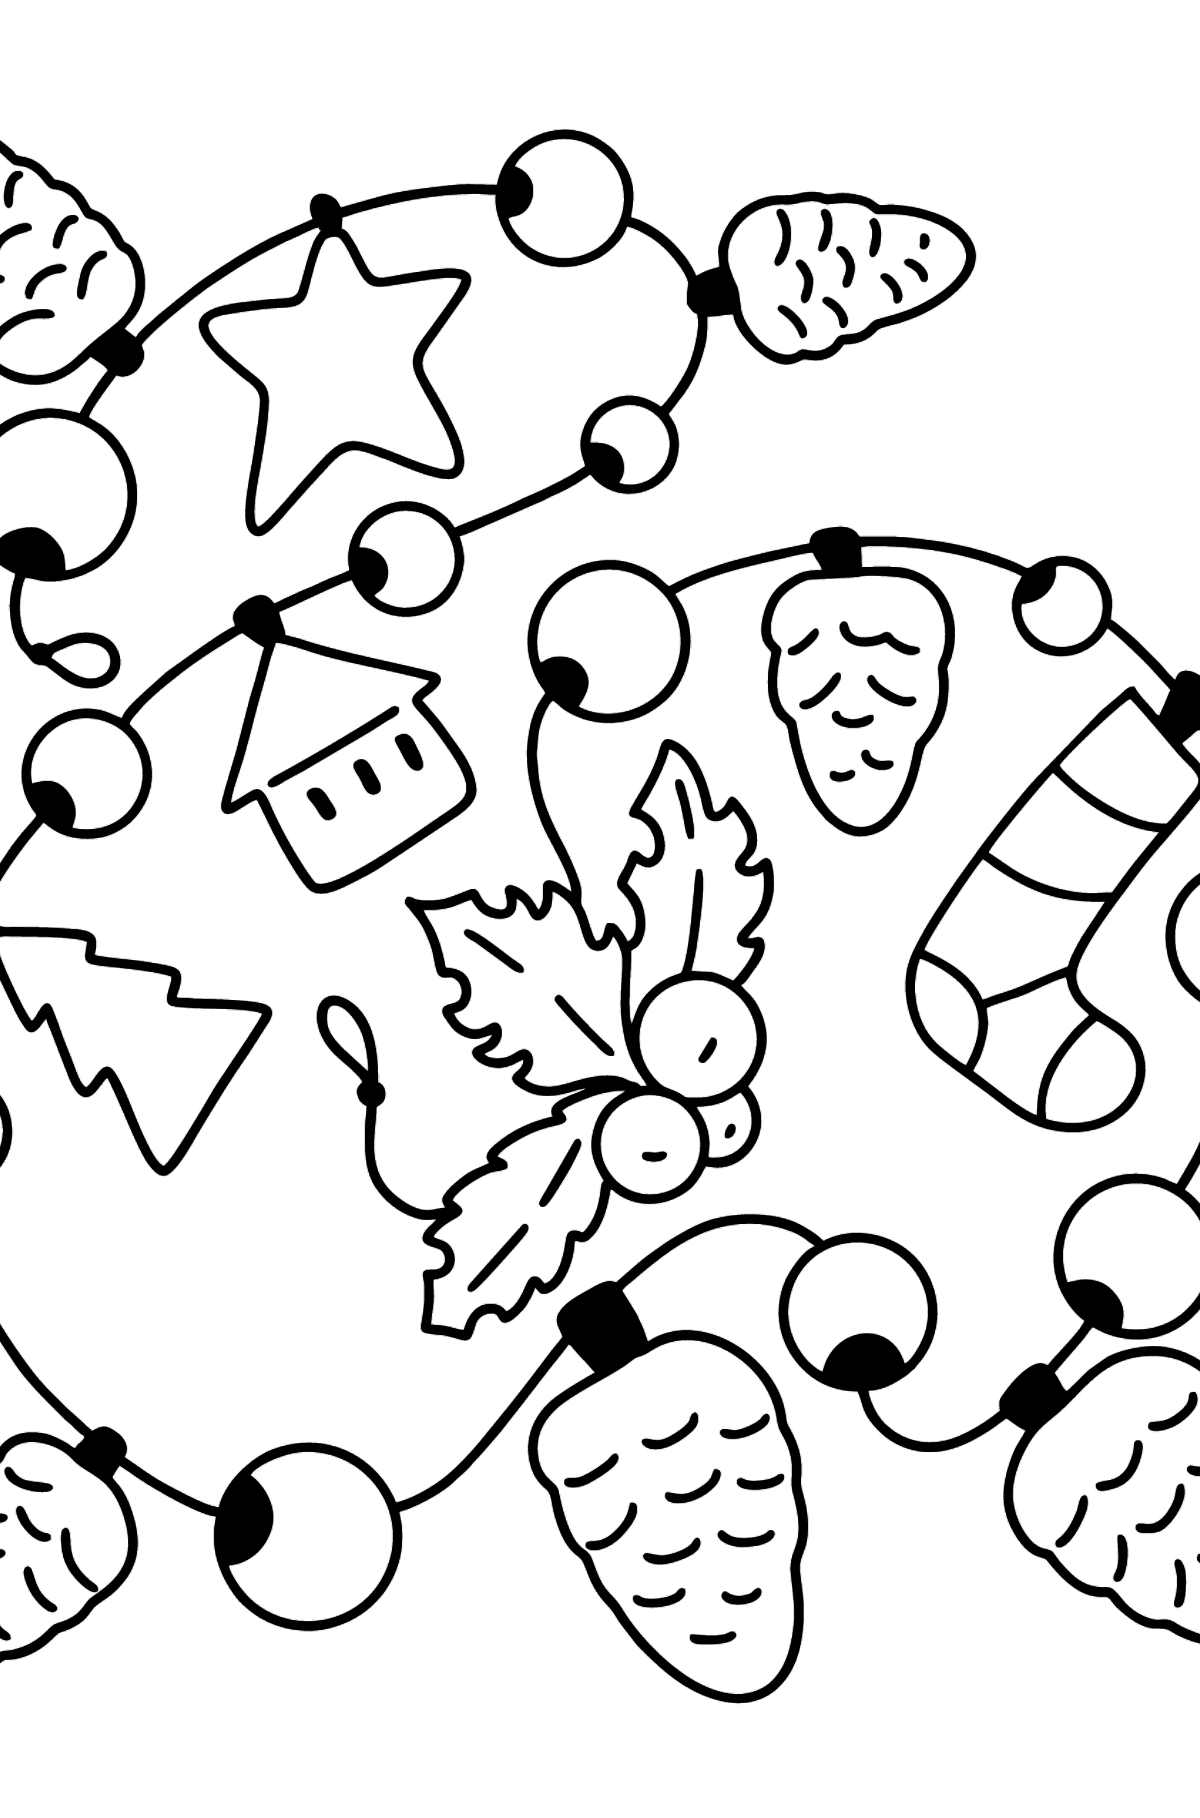 New year garland coloring page - Coloring Pages for Kids